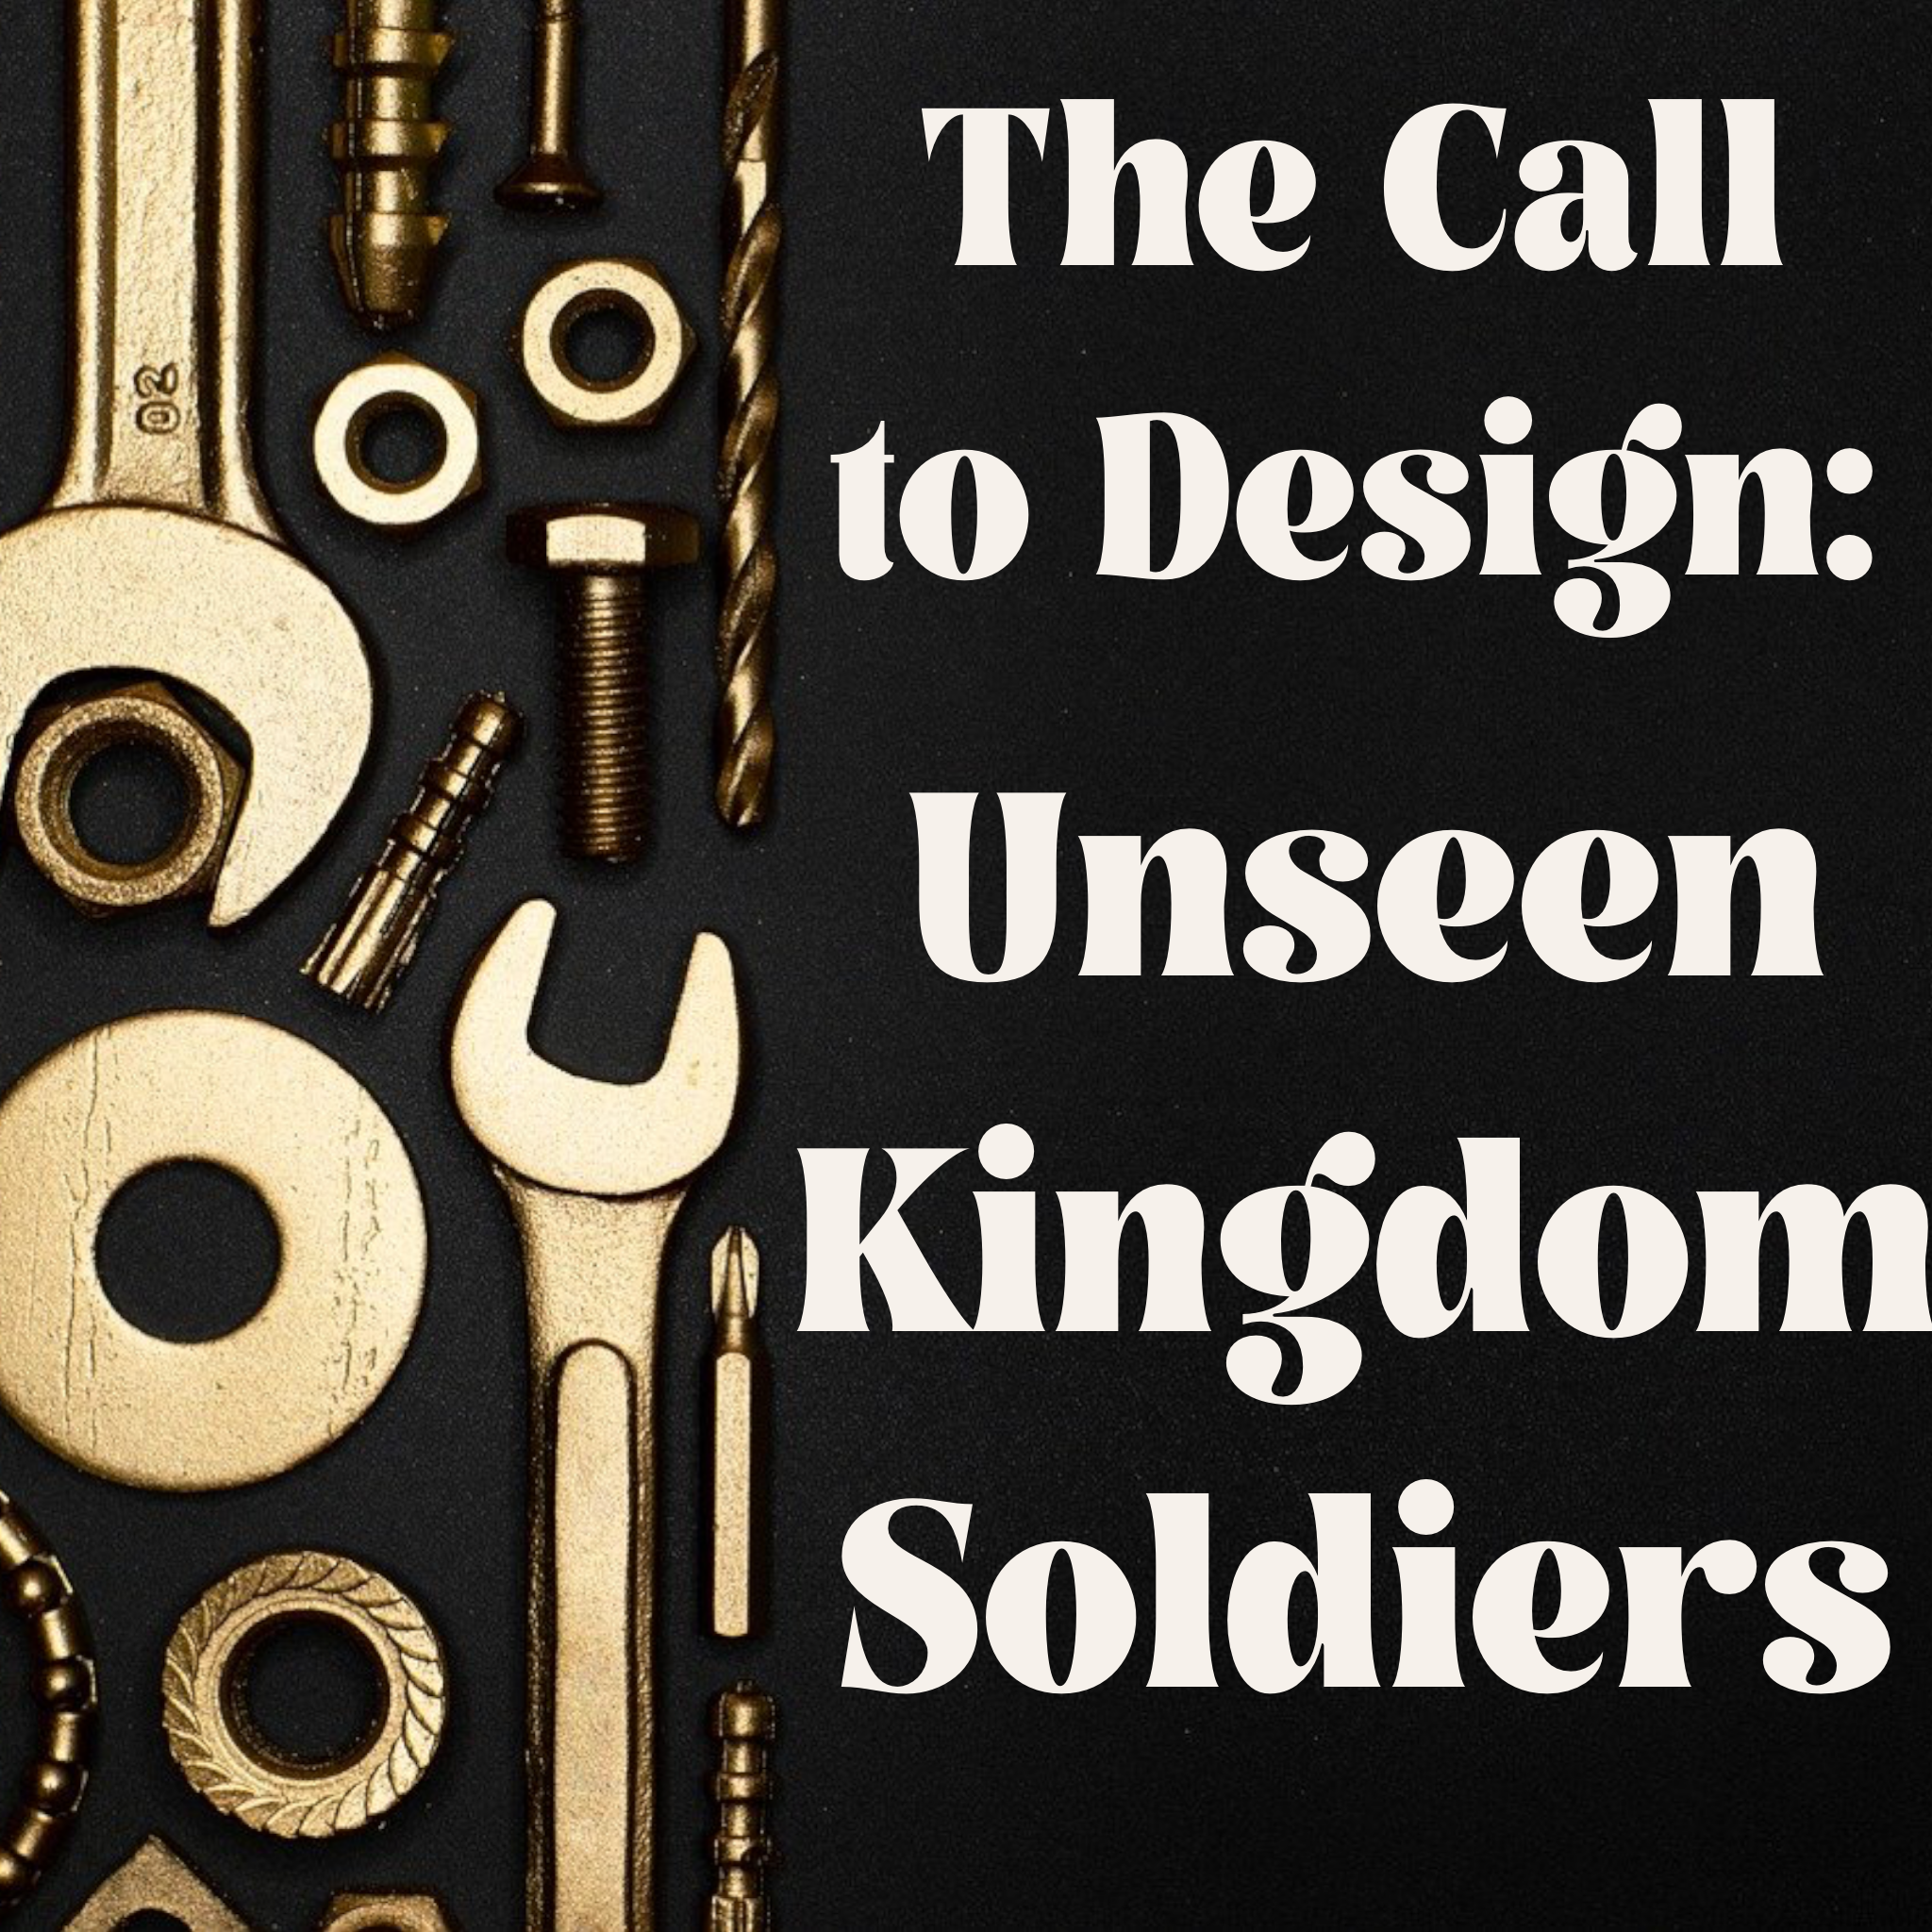 The Call to Design: Unseen Kingdom Soldiers - 5/15/22